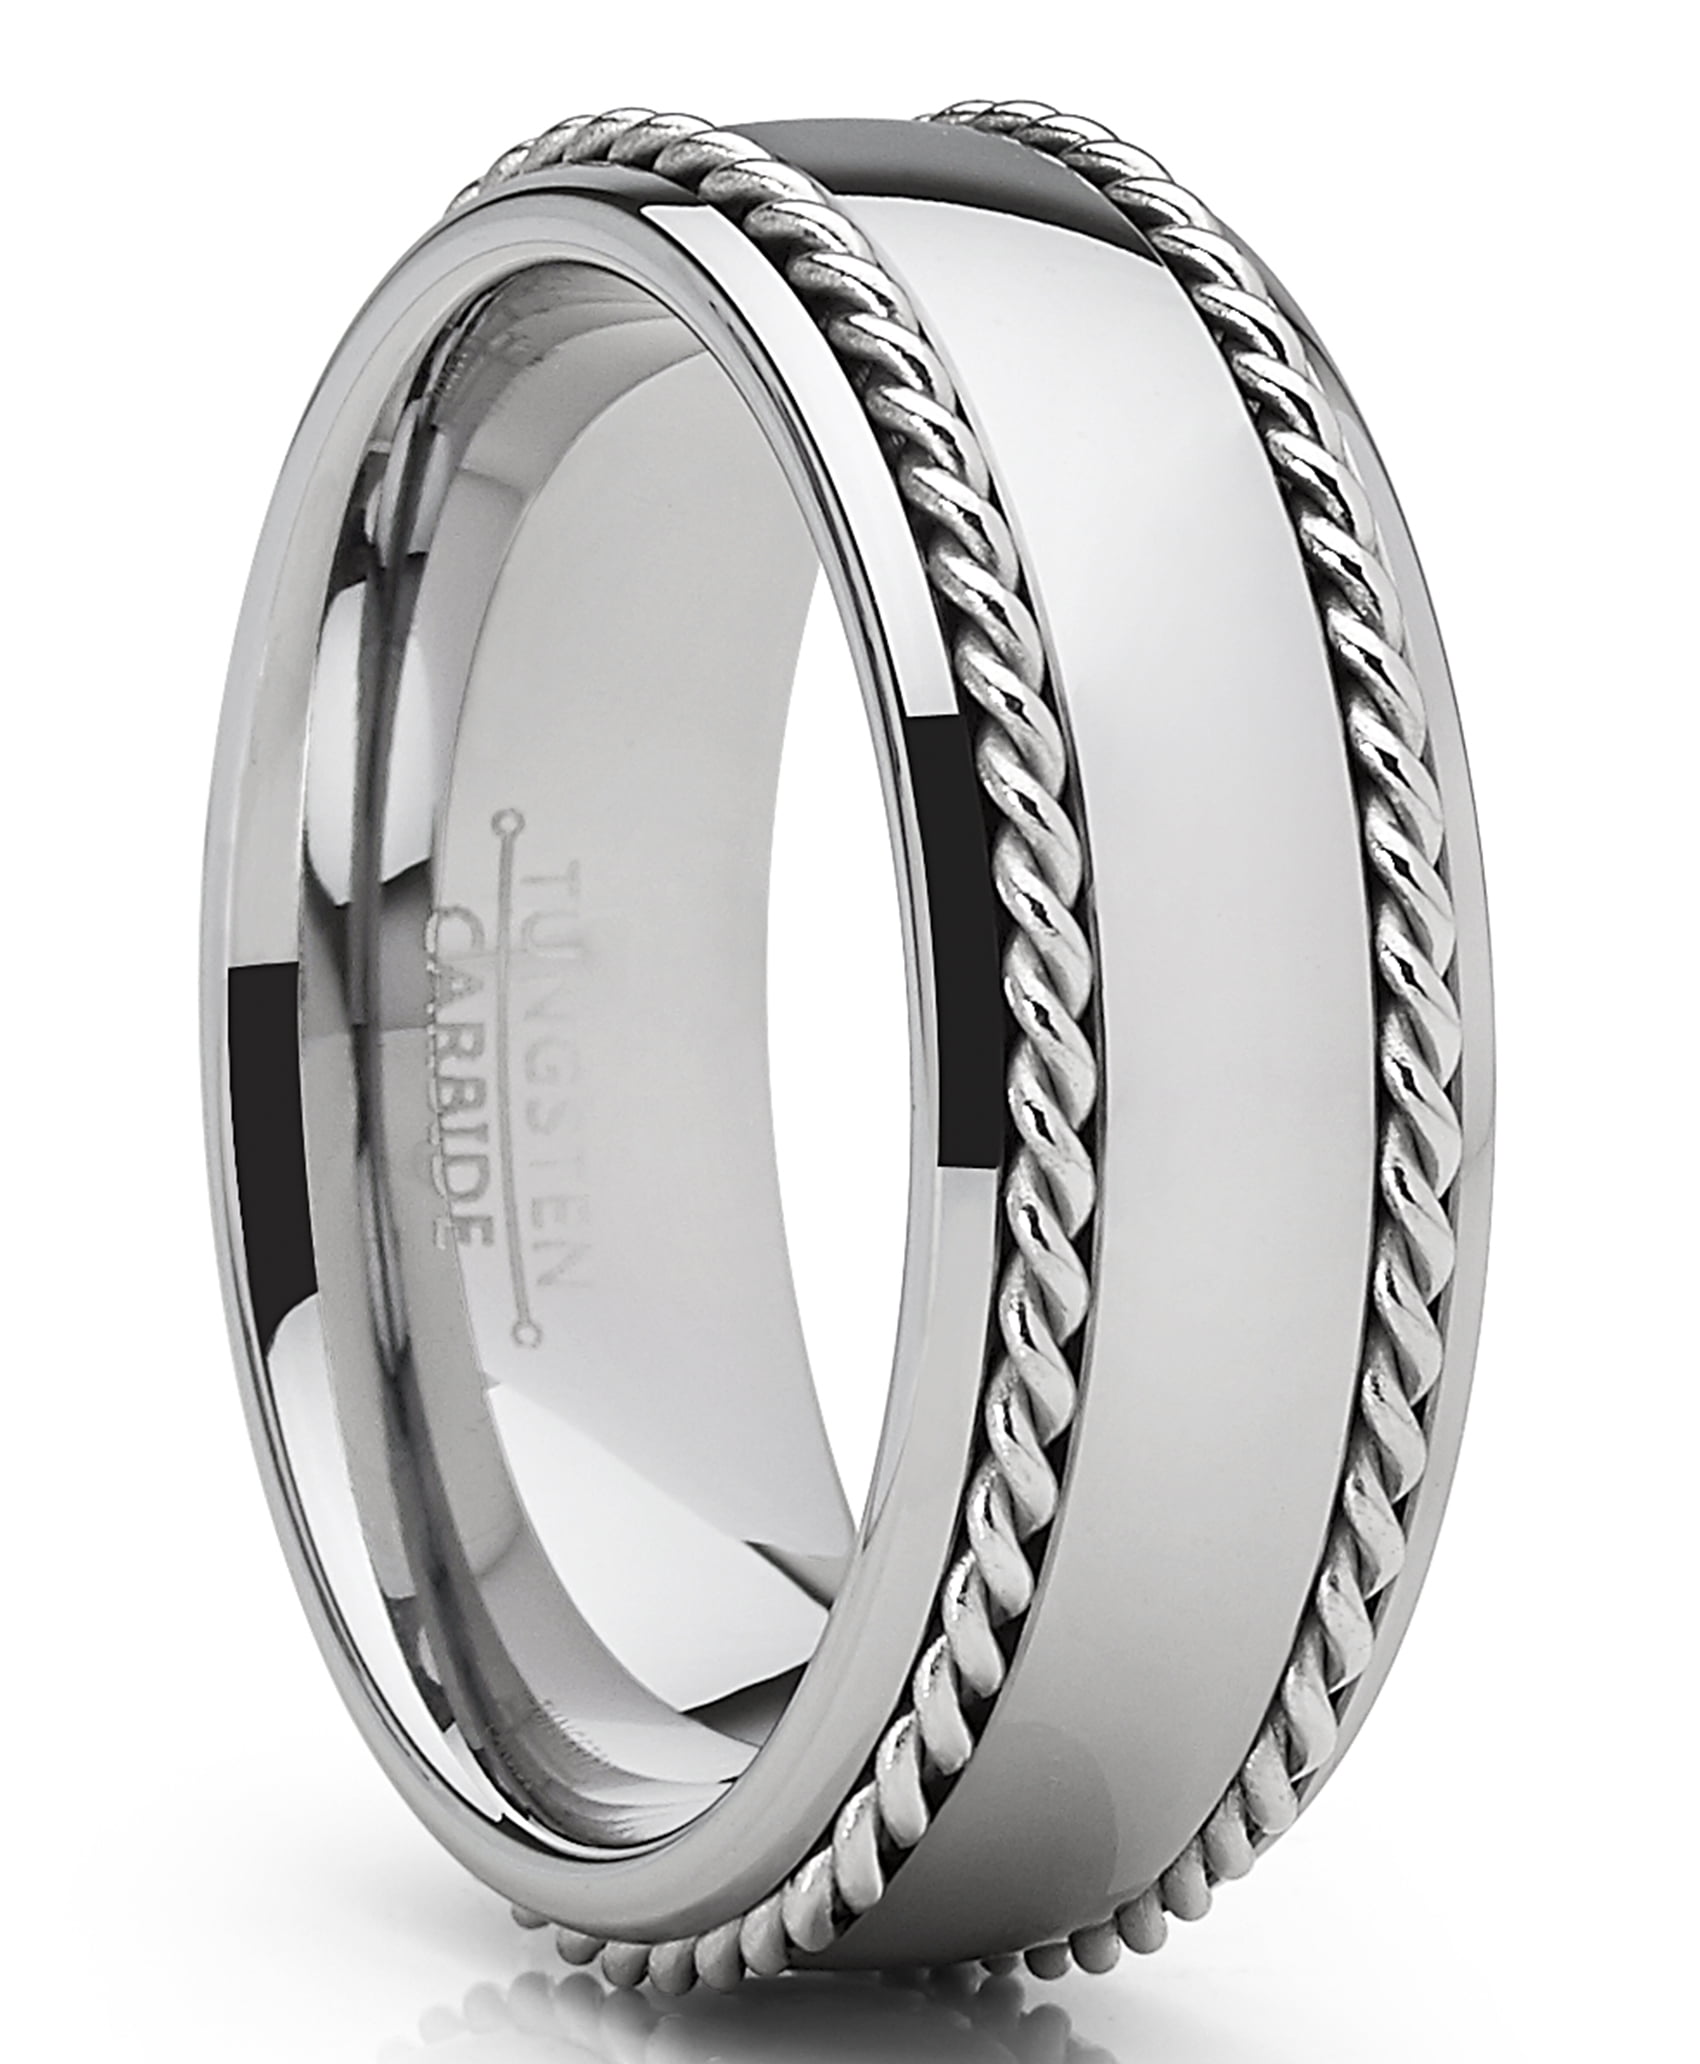 Mens 12mm Stainless Steel Modern Grooved Wedding Band Ring Heavy Brushed Finish